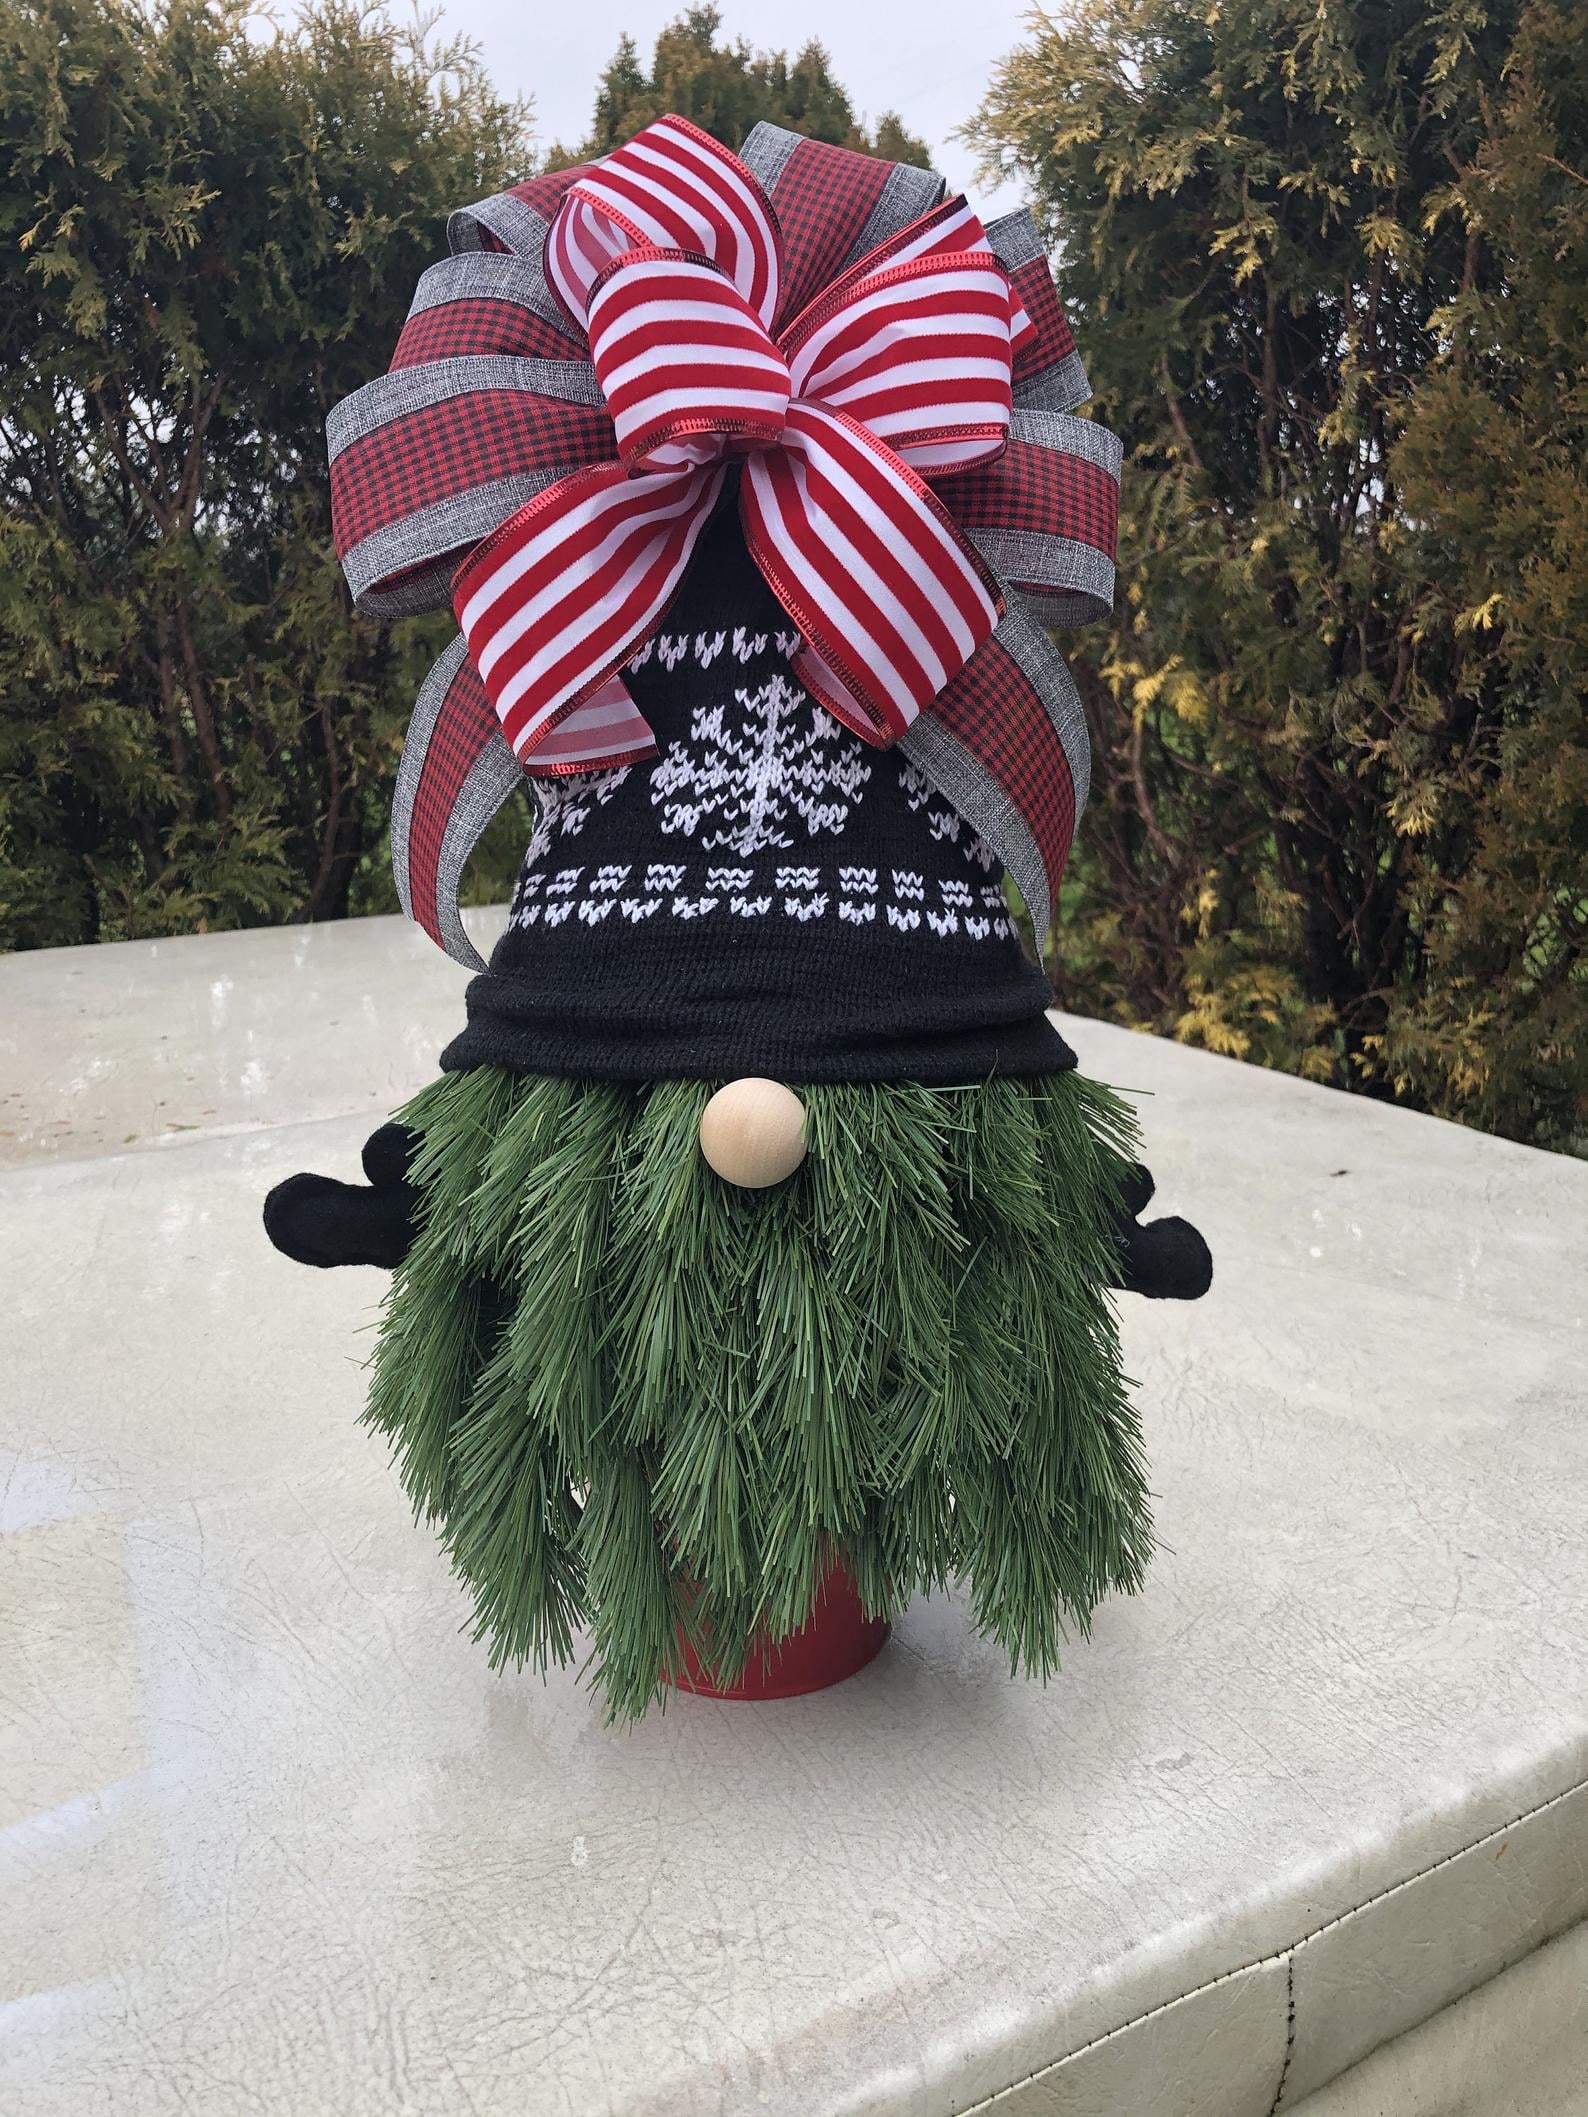 Our Favorite Christmas Gnome Decorating Ideas